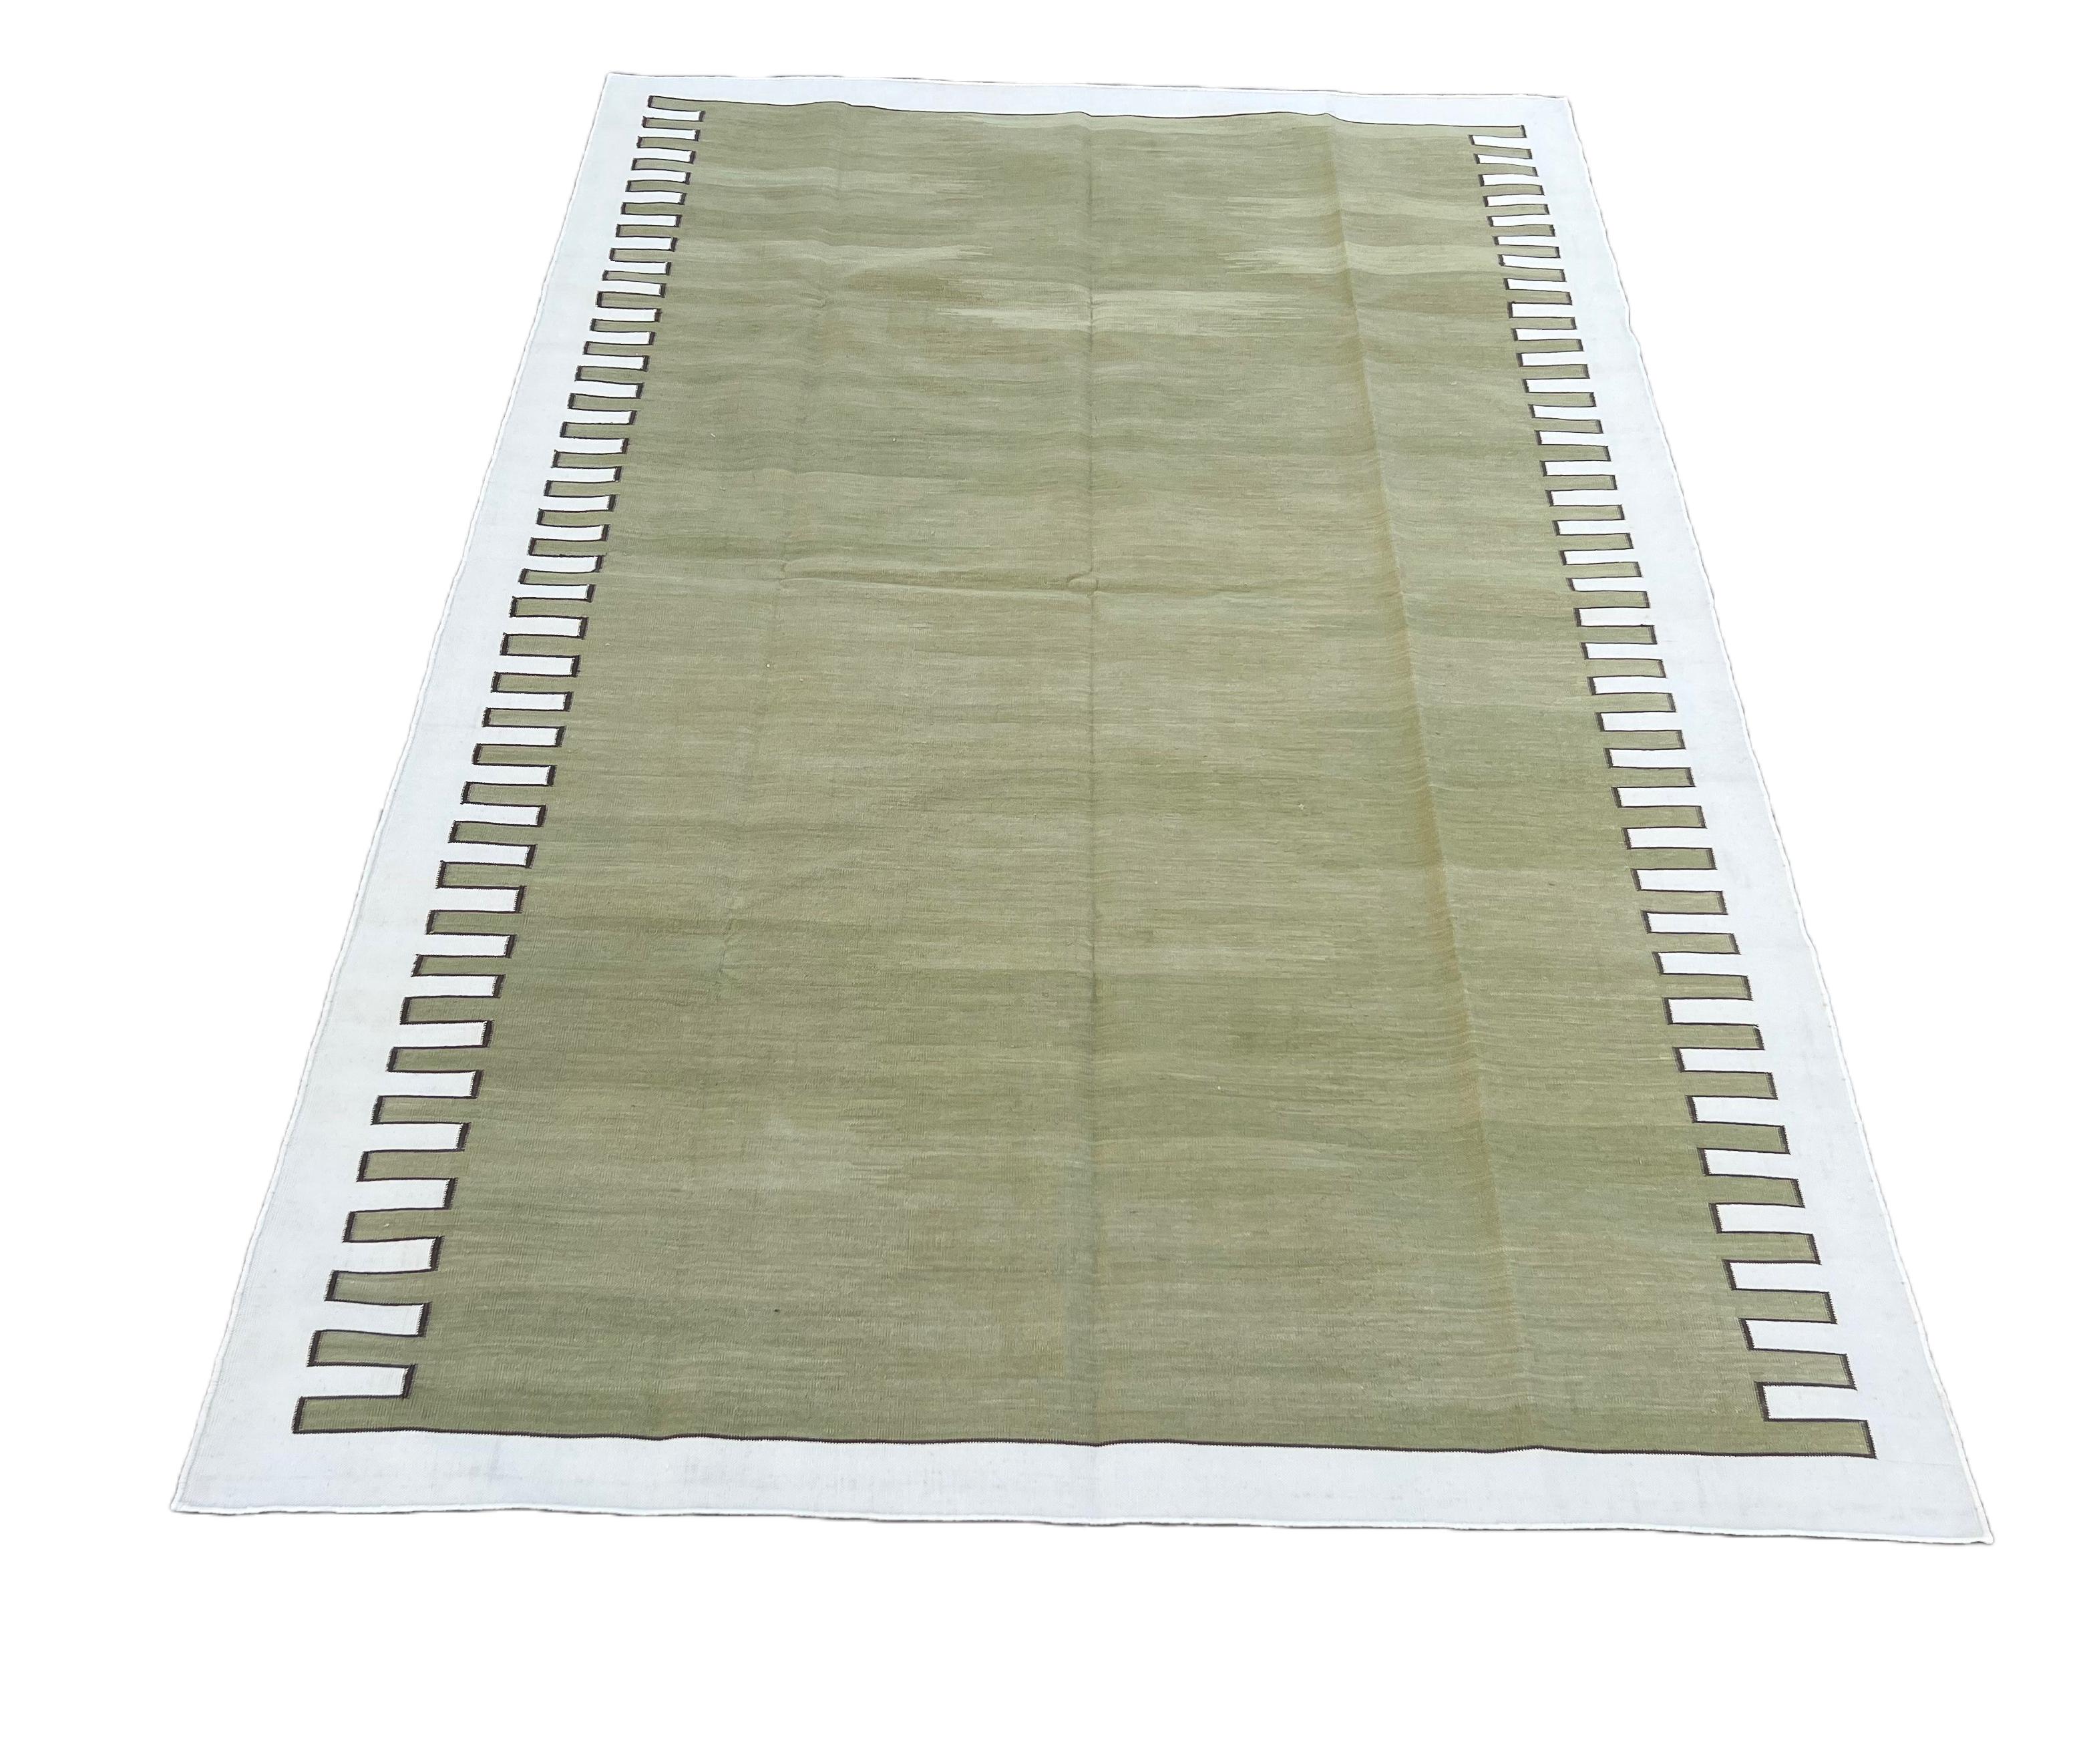 Indian Handmade Cotton Area Flat Weave Rug, Olive Green & Cream Zig Zag Striped Dhurrie For Sale